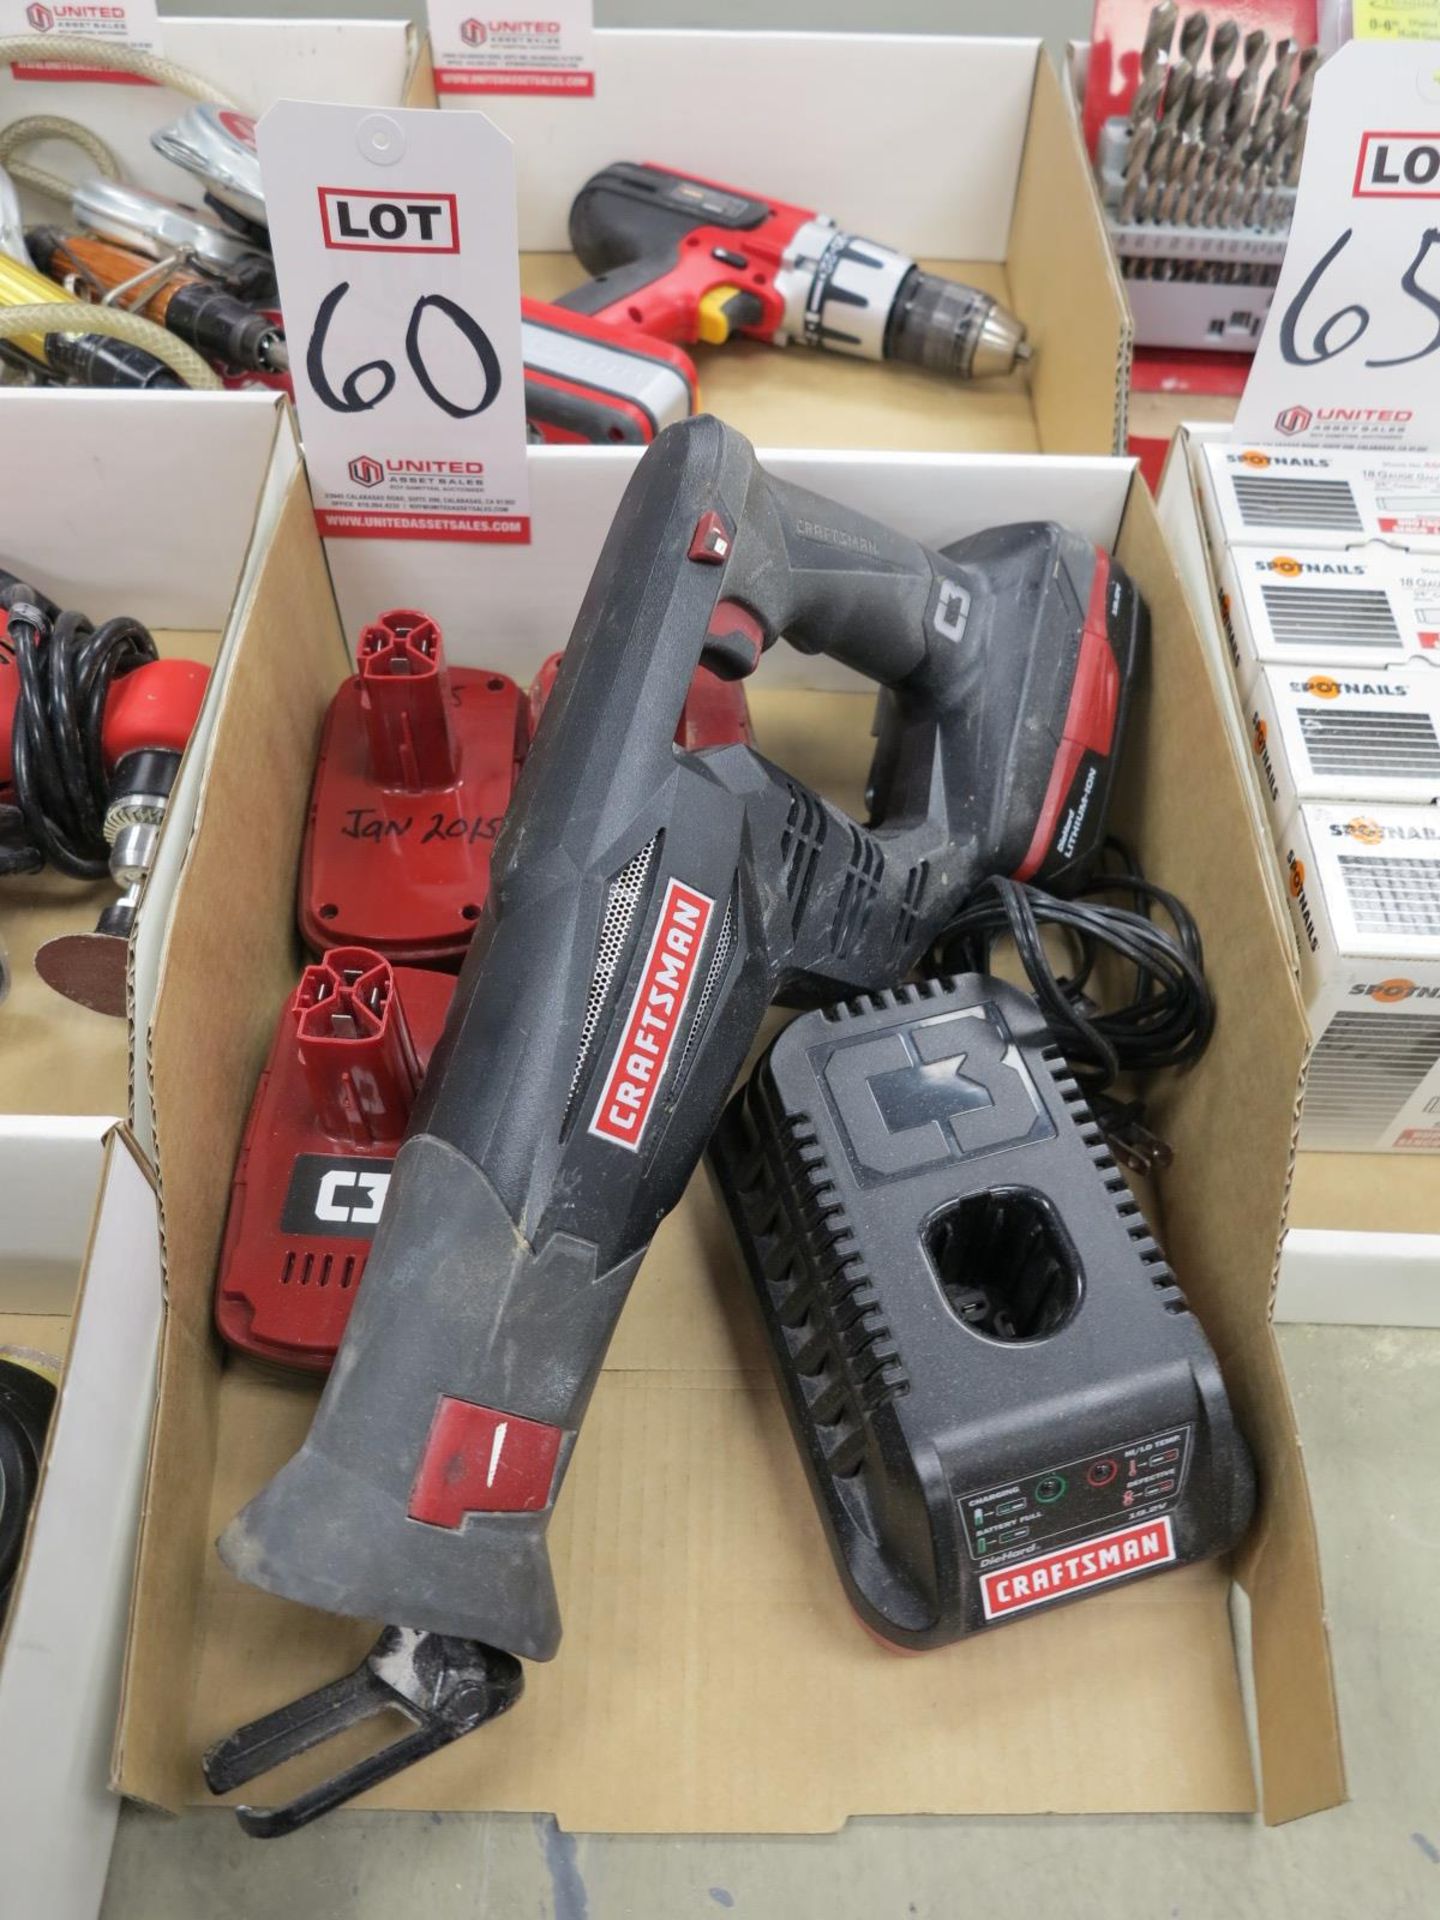 CRAFTSMAN 19.2V CORDLESS RECIPROCATING SAW, W/ (4) 19.2V BATTERIES AND CHARGER